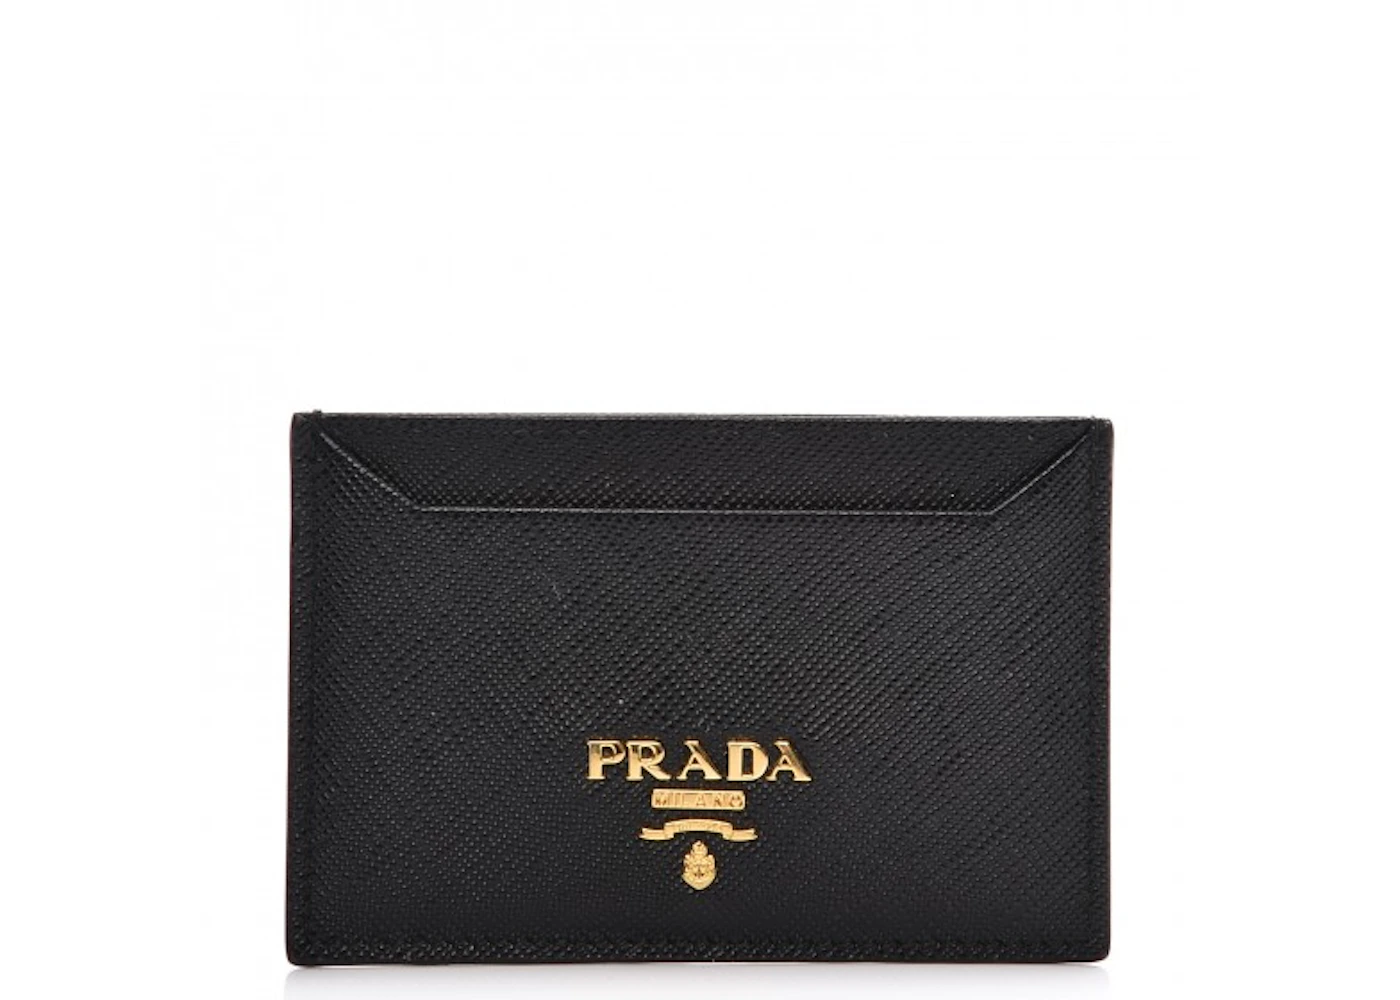 Prada Metal Card Case Wallet Saffiano Nero Black in Leather with Gold-Tone  - US